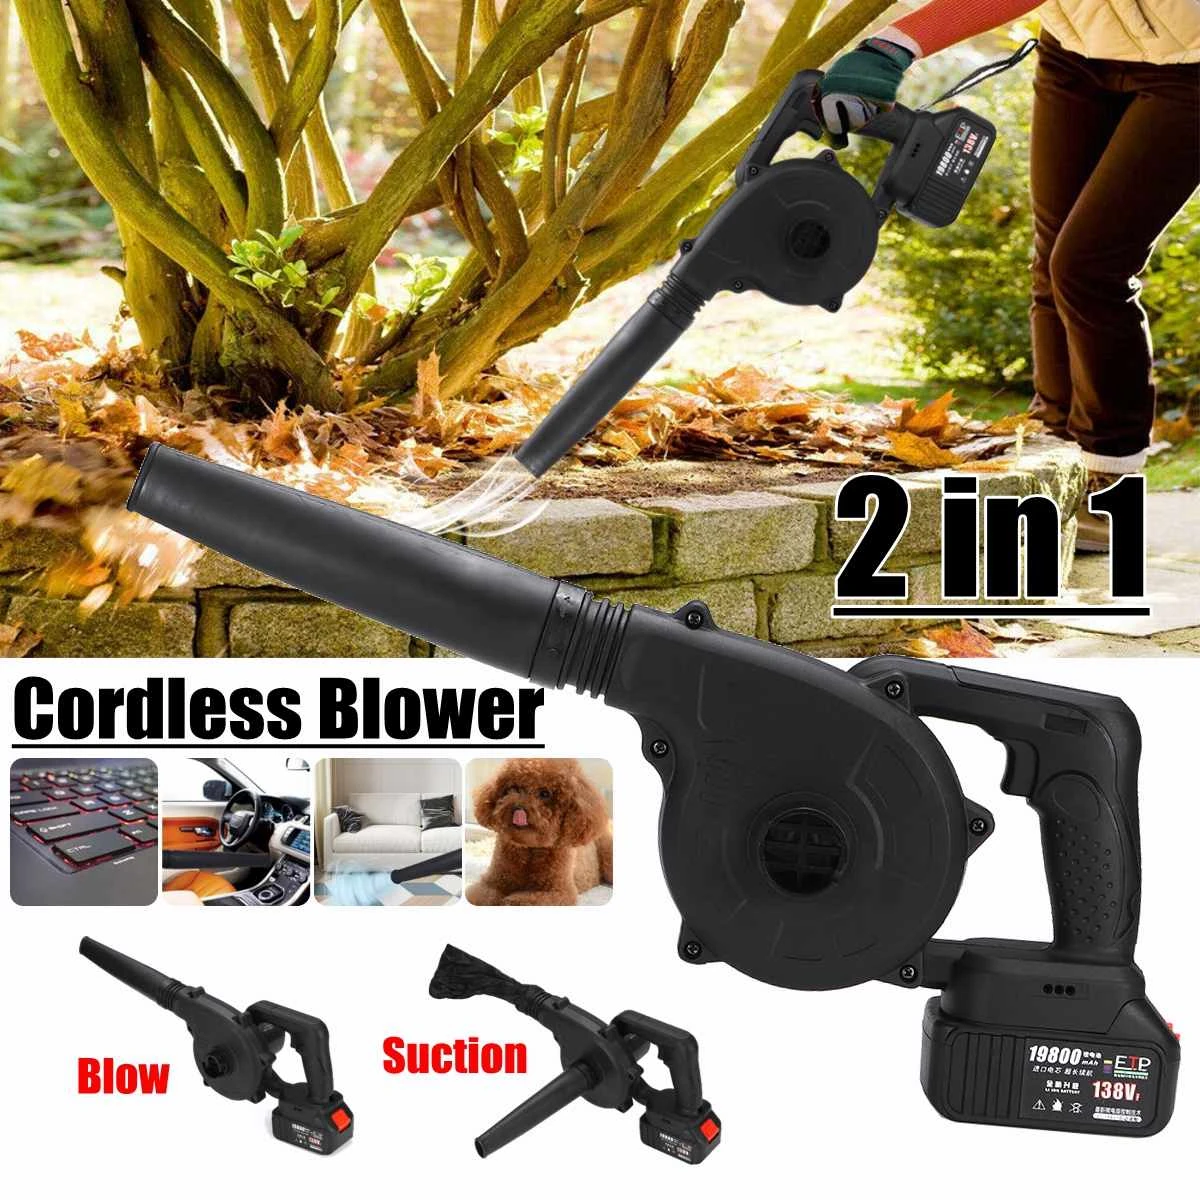 craftsman electric chainsaw 128VF 2 In 1 1600W Cordless Electric Air Blower Blowing& Suction Leaf Dust Collector Vacuum Cleaner With 19800mAh Battery best da polisher